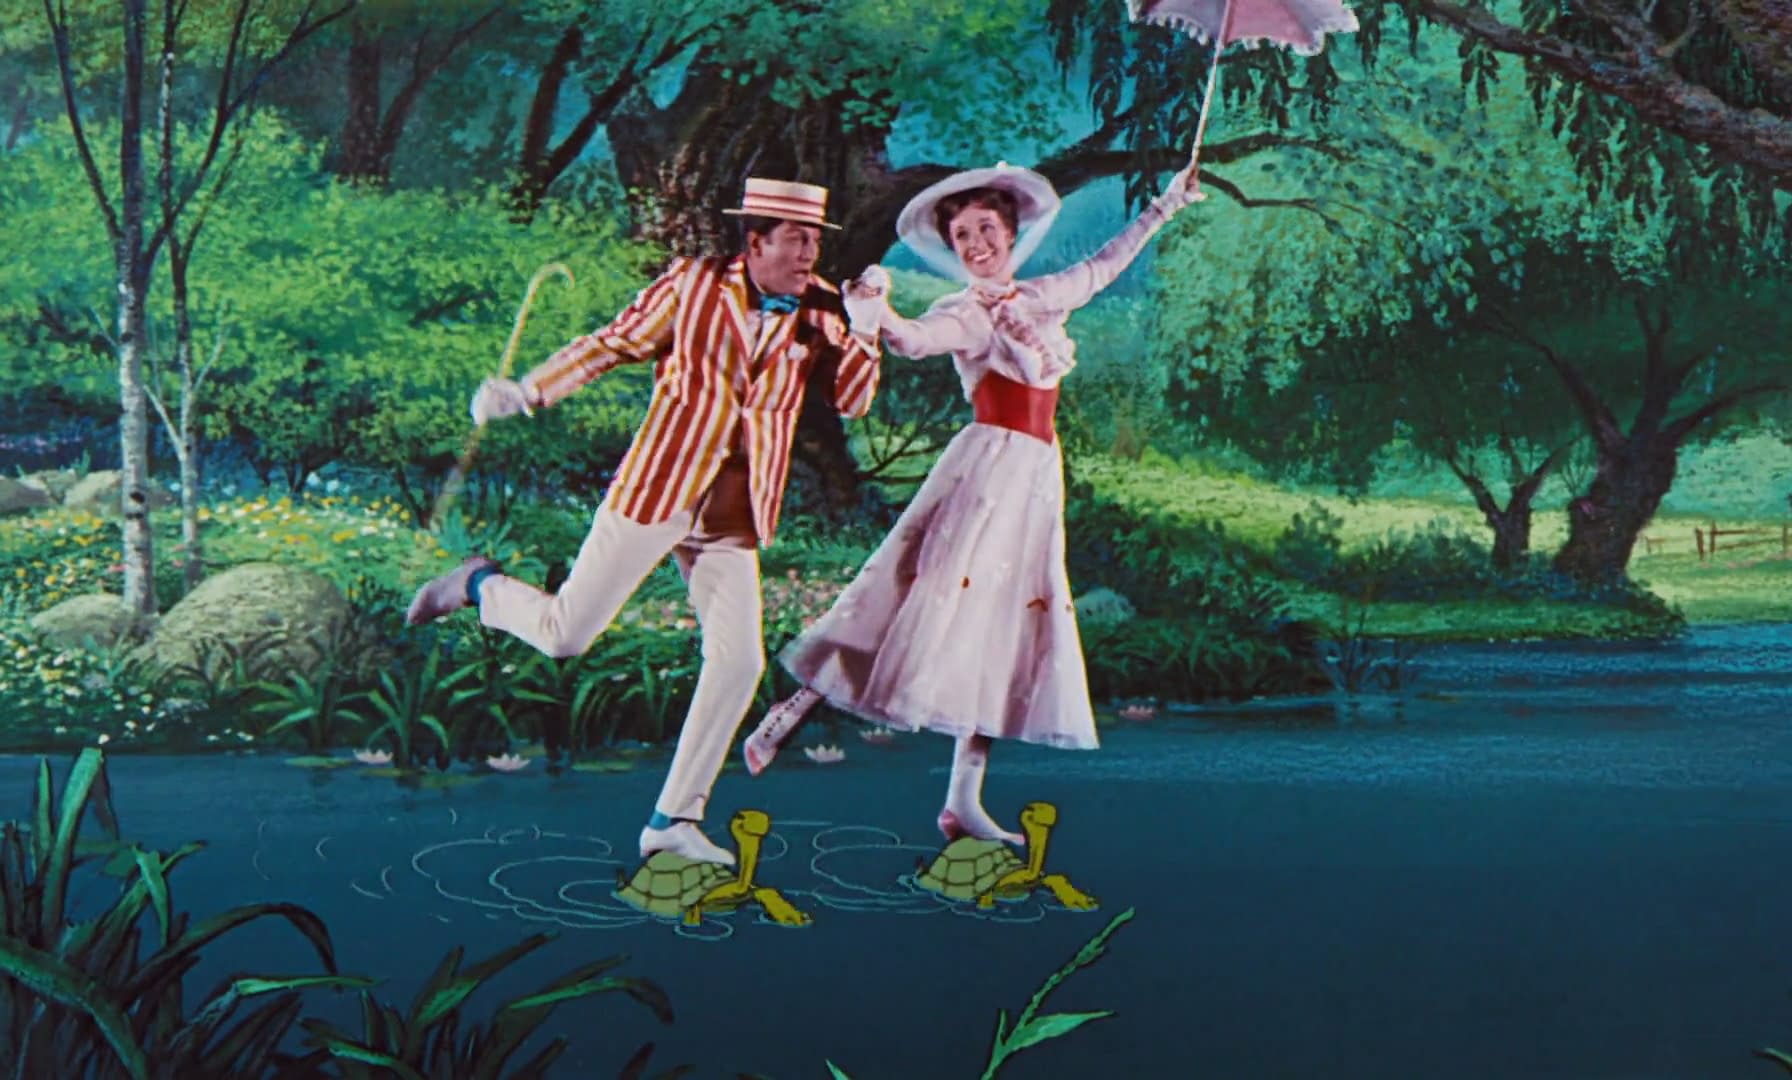 'Mary Poppins' is the Greatest Movie Musical of All Time and This is the Hill I'm Willing to Die On